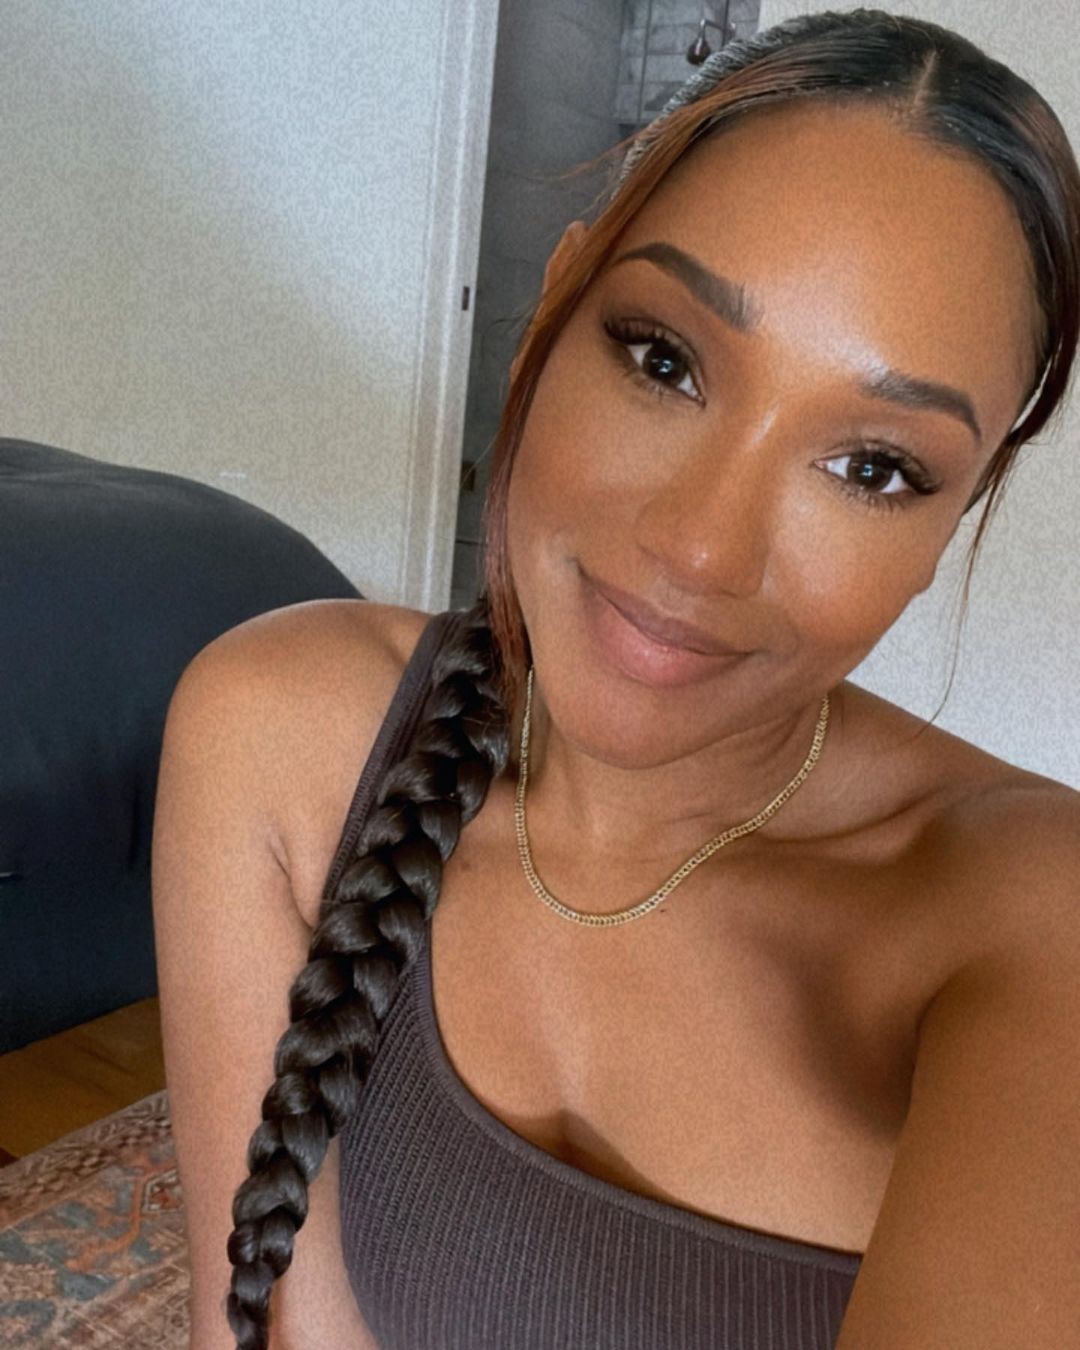 Candice Patton Selfie TheFappening.Pro 12 - Candice Patton Nude Iris West-Allen From “Flash” And “Legends of Tomorrow” (74 Photos)